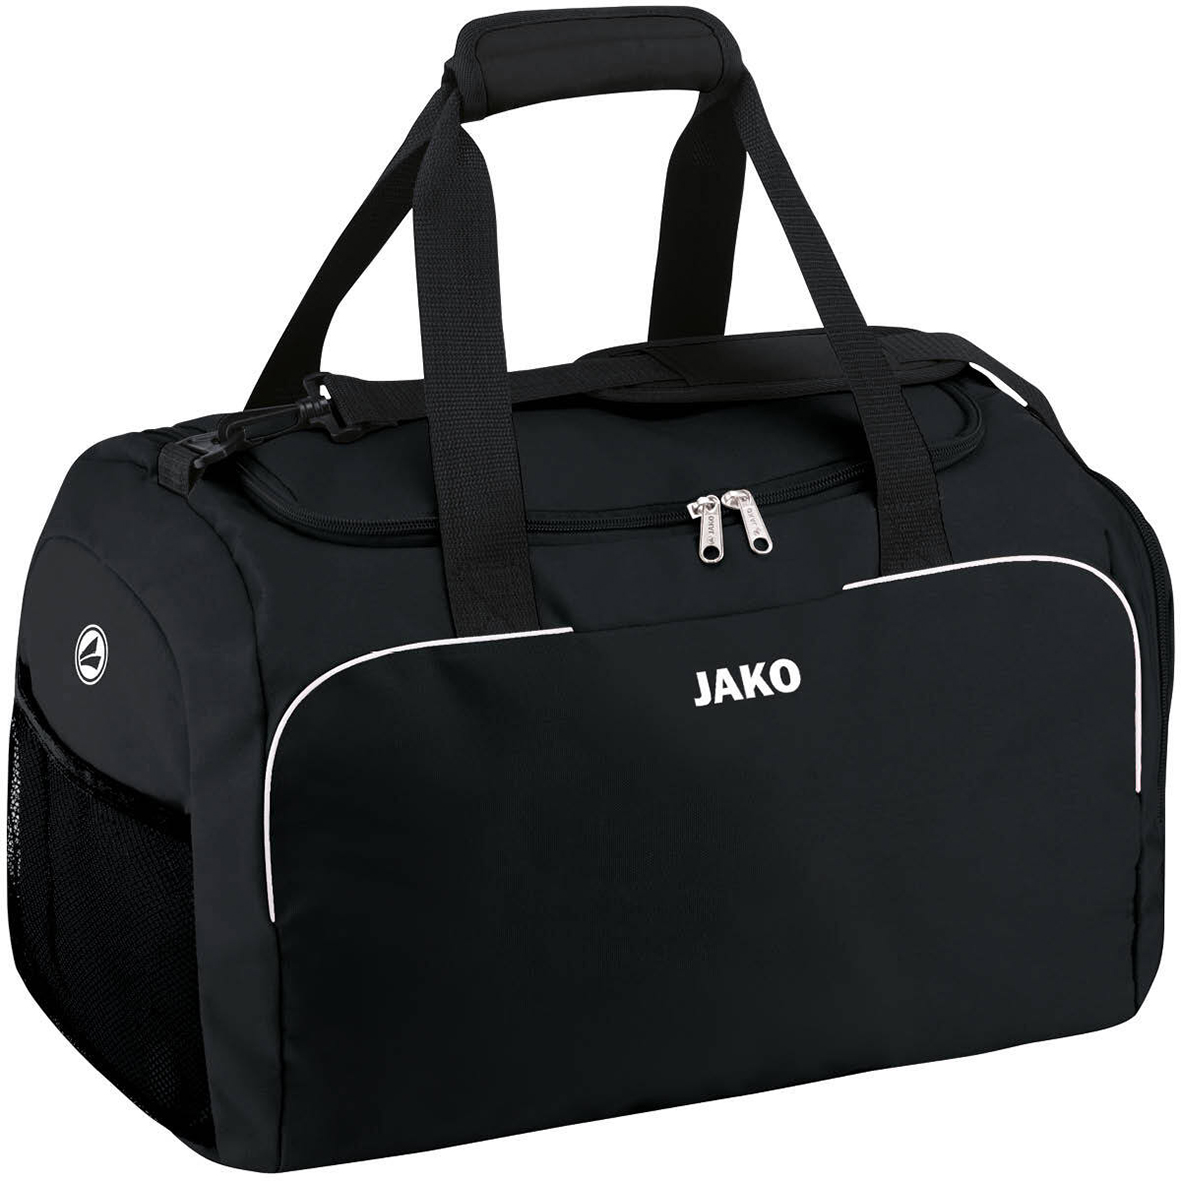 SPORTS BAG JAKO CLASSICO WITH SIDE WET COMPARTMENTS, BLACK.